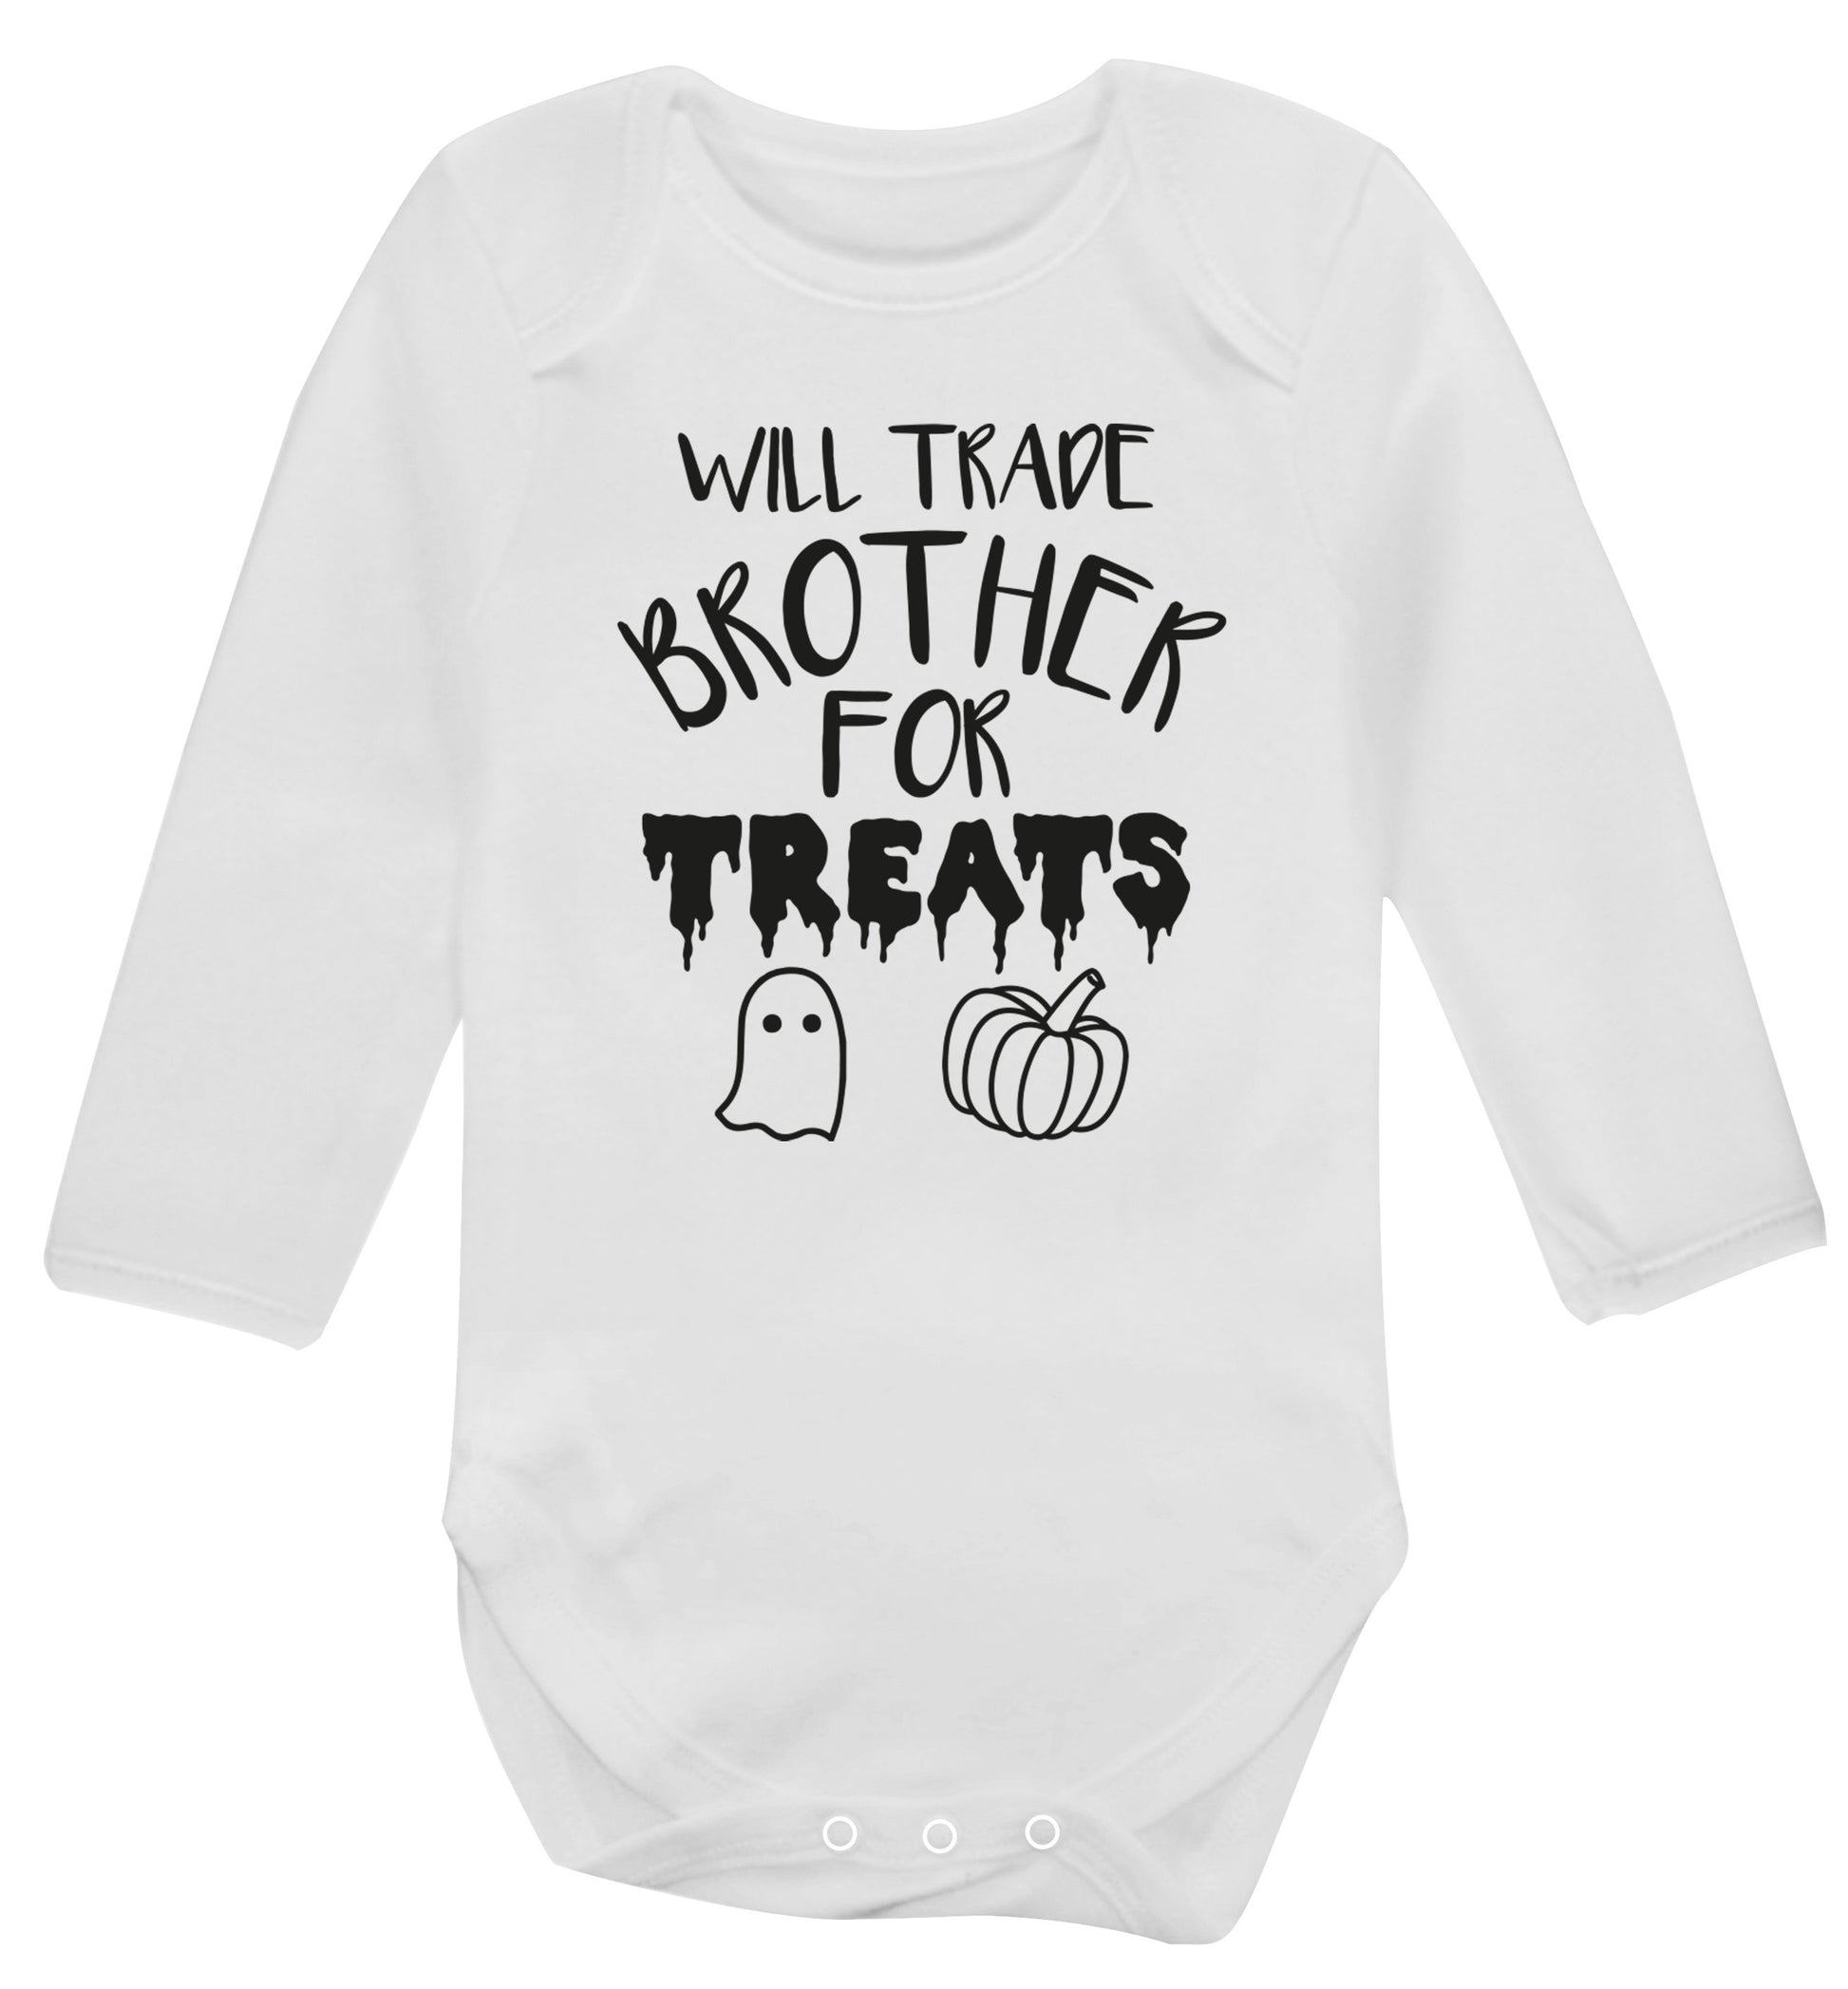 Will trade brother for treats Baby Vest long sleeved white 6-12 months